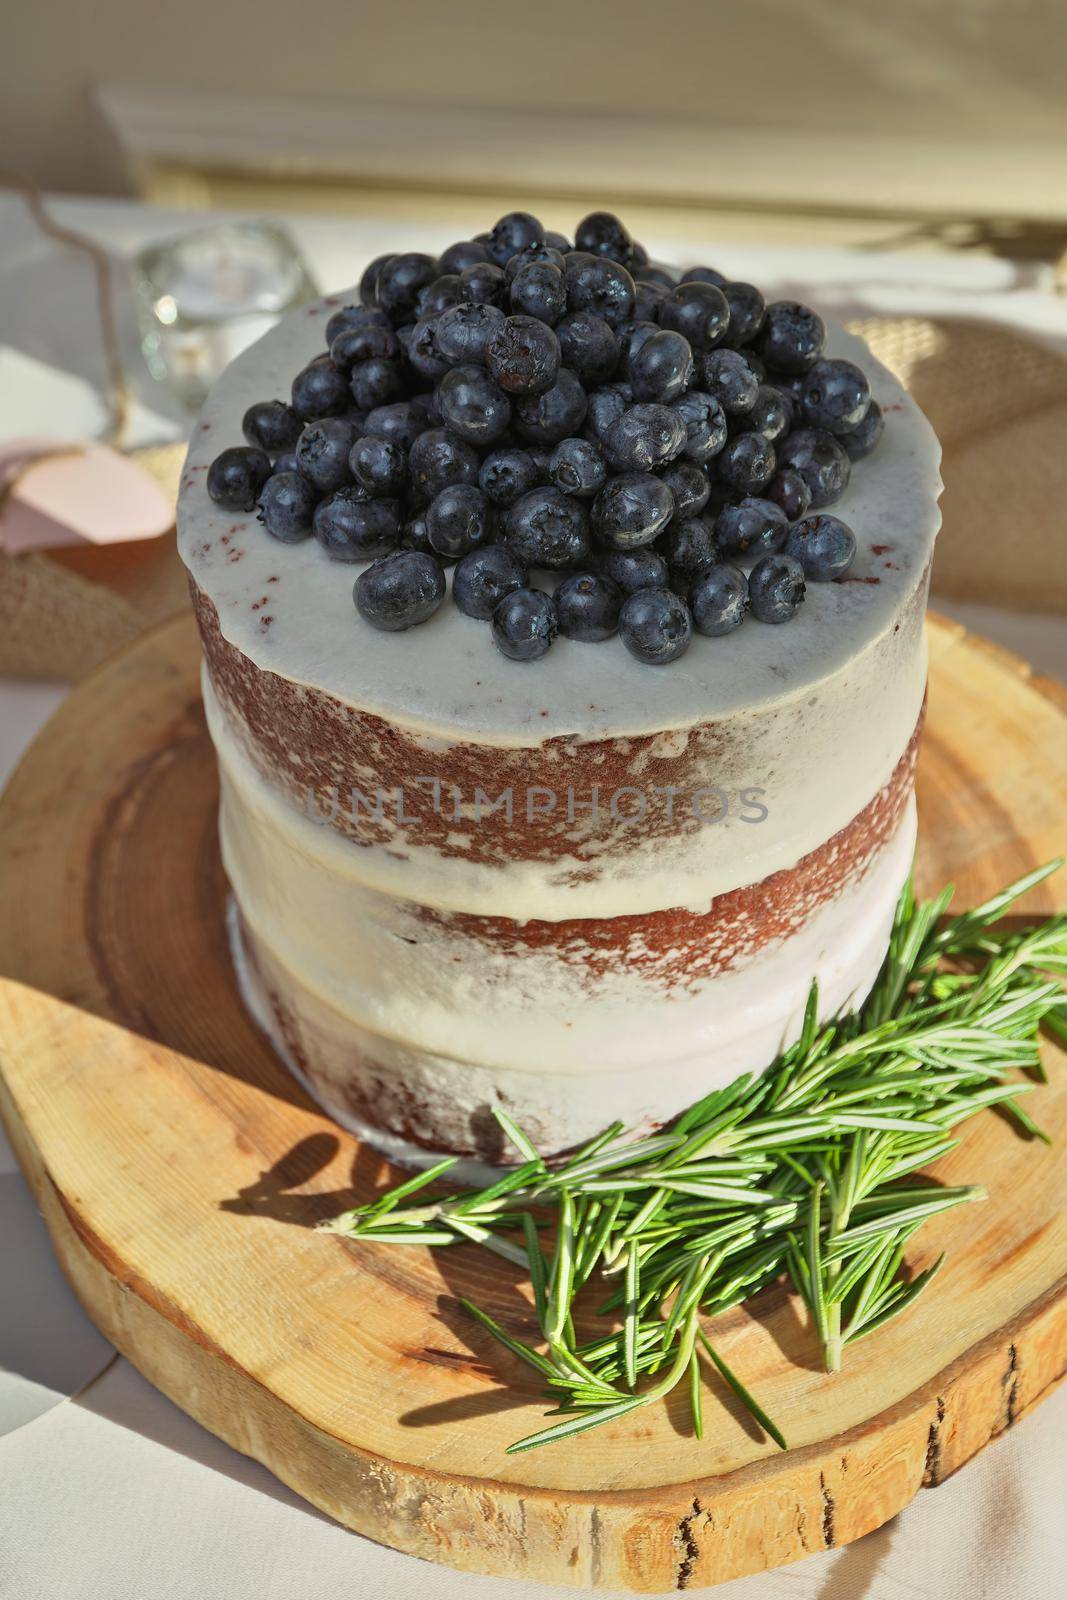 Rustic Homemade Naked Layered Wedding Cake with Vanilla Icing, Fresh Blueberries, and Rosemary by markvandam